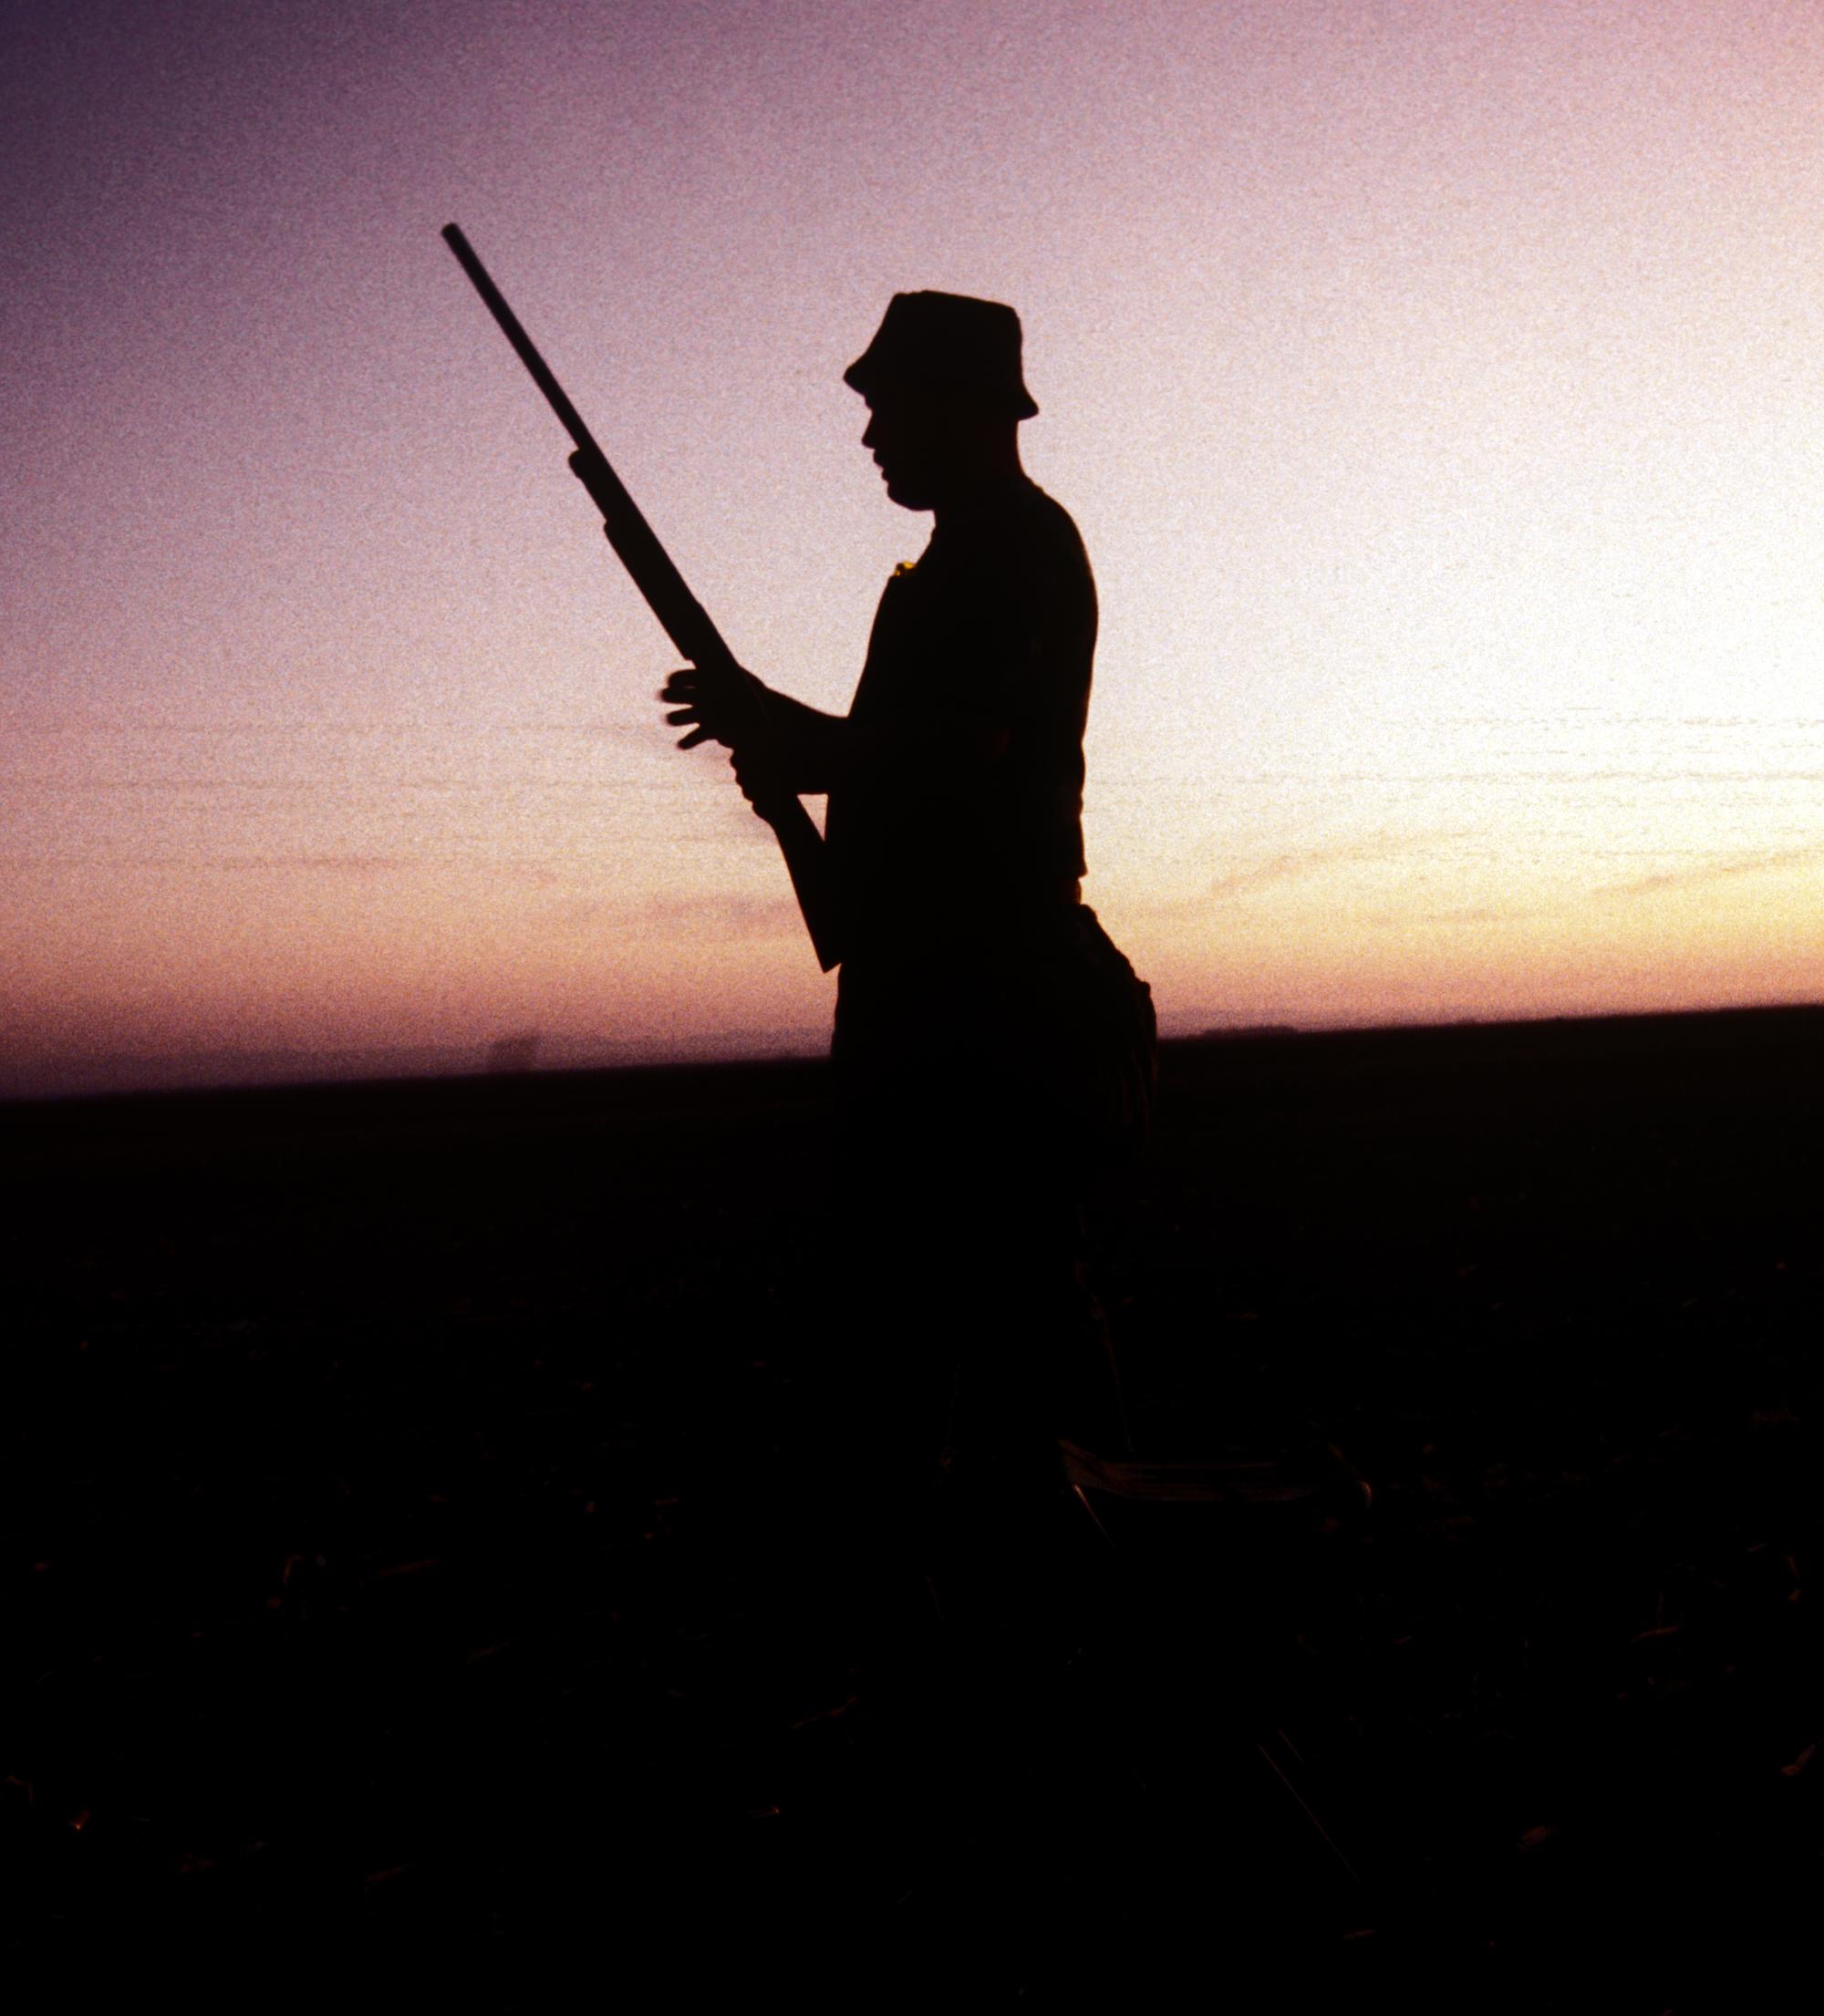 Imperial Valley Press (1992) - Dove Hunting #1